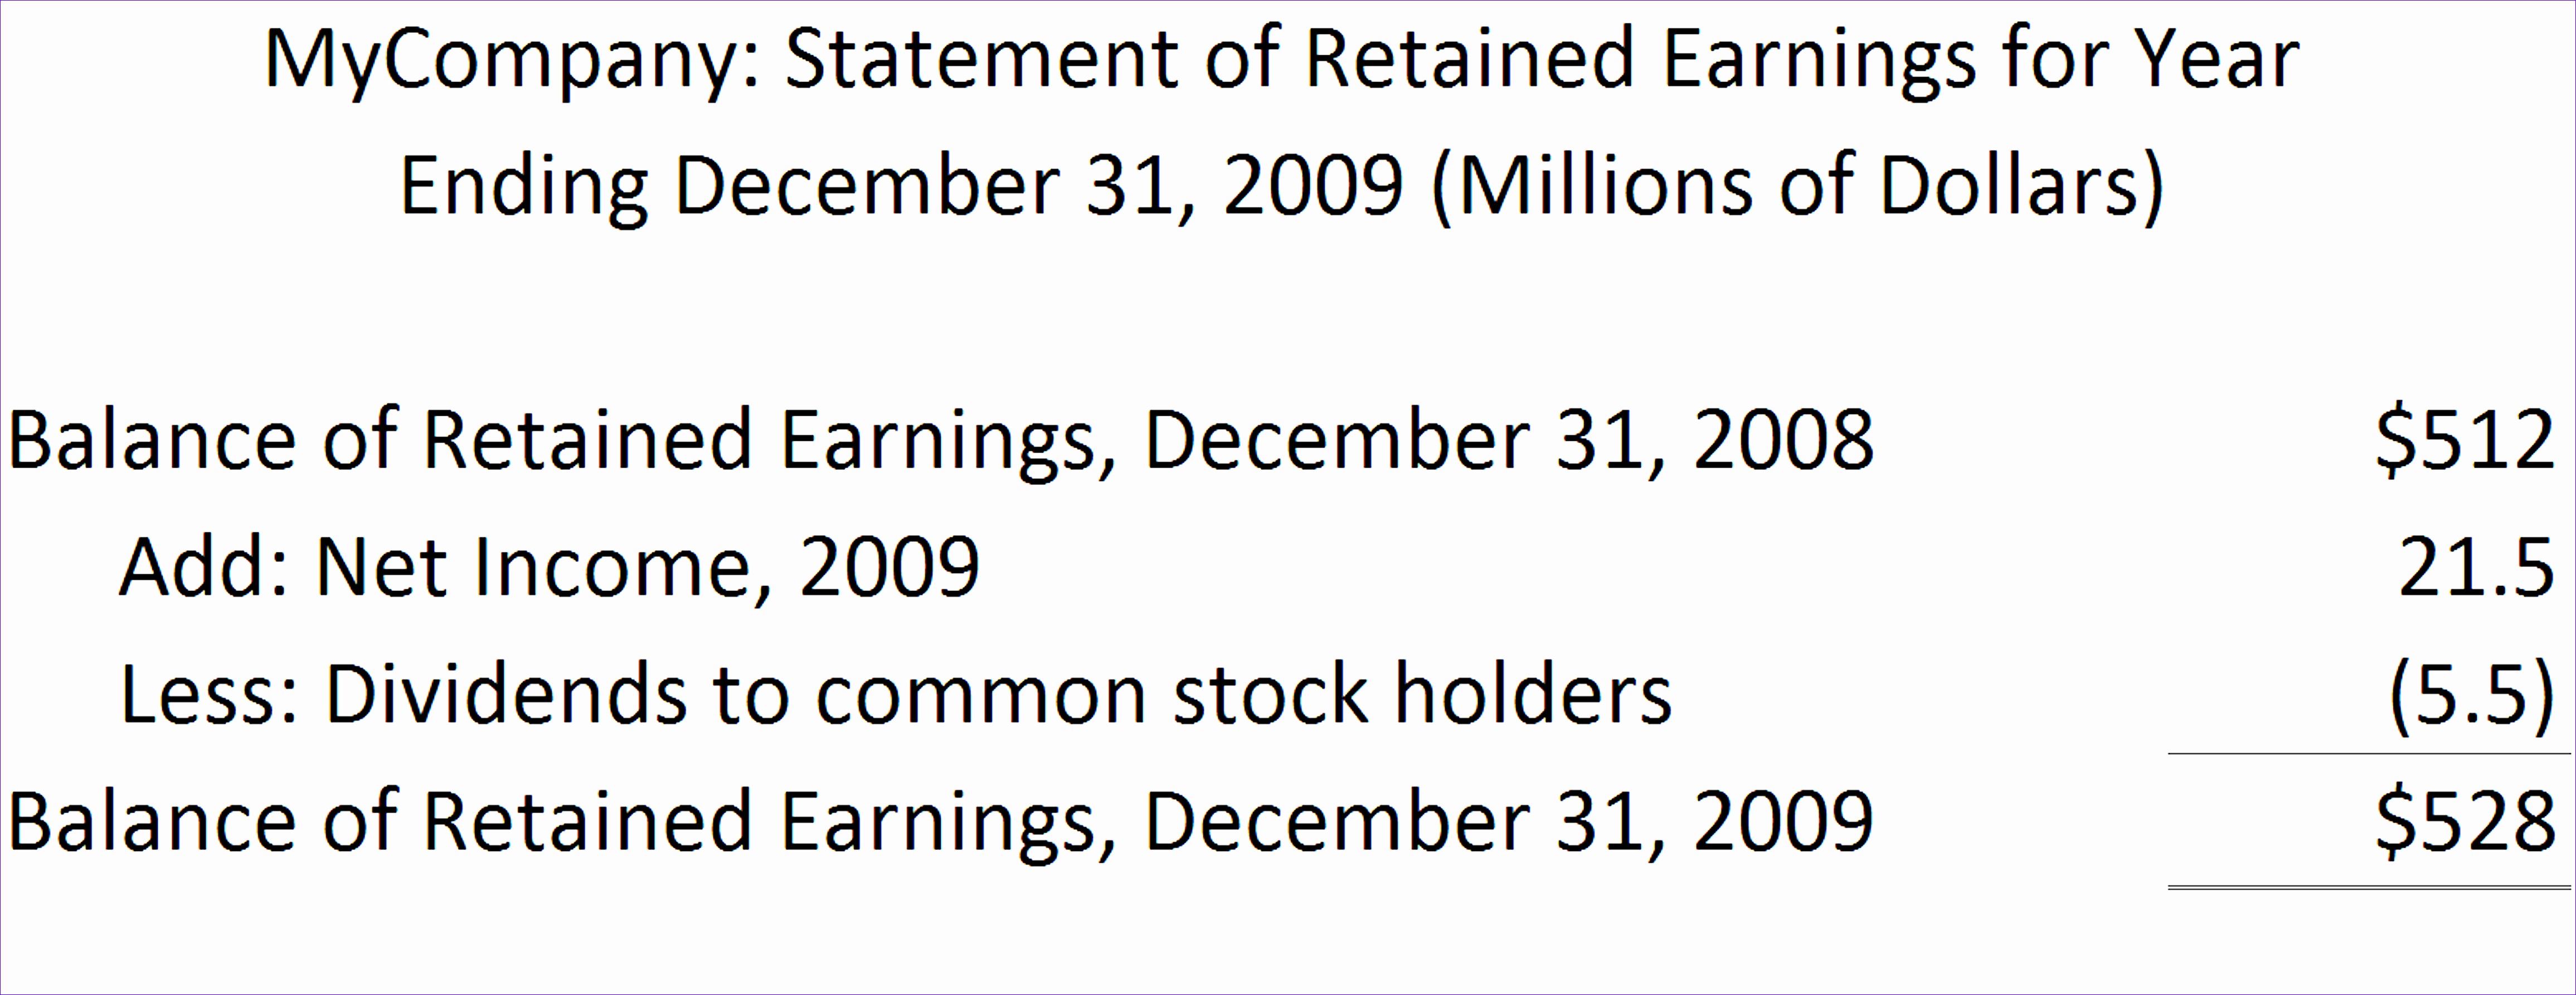 DA24A0 statement of retained earnings